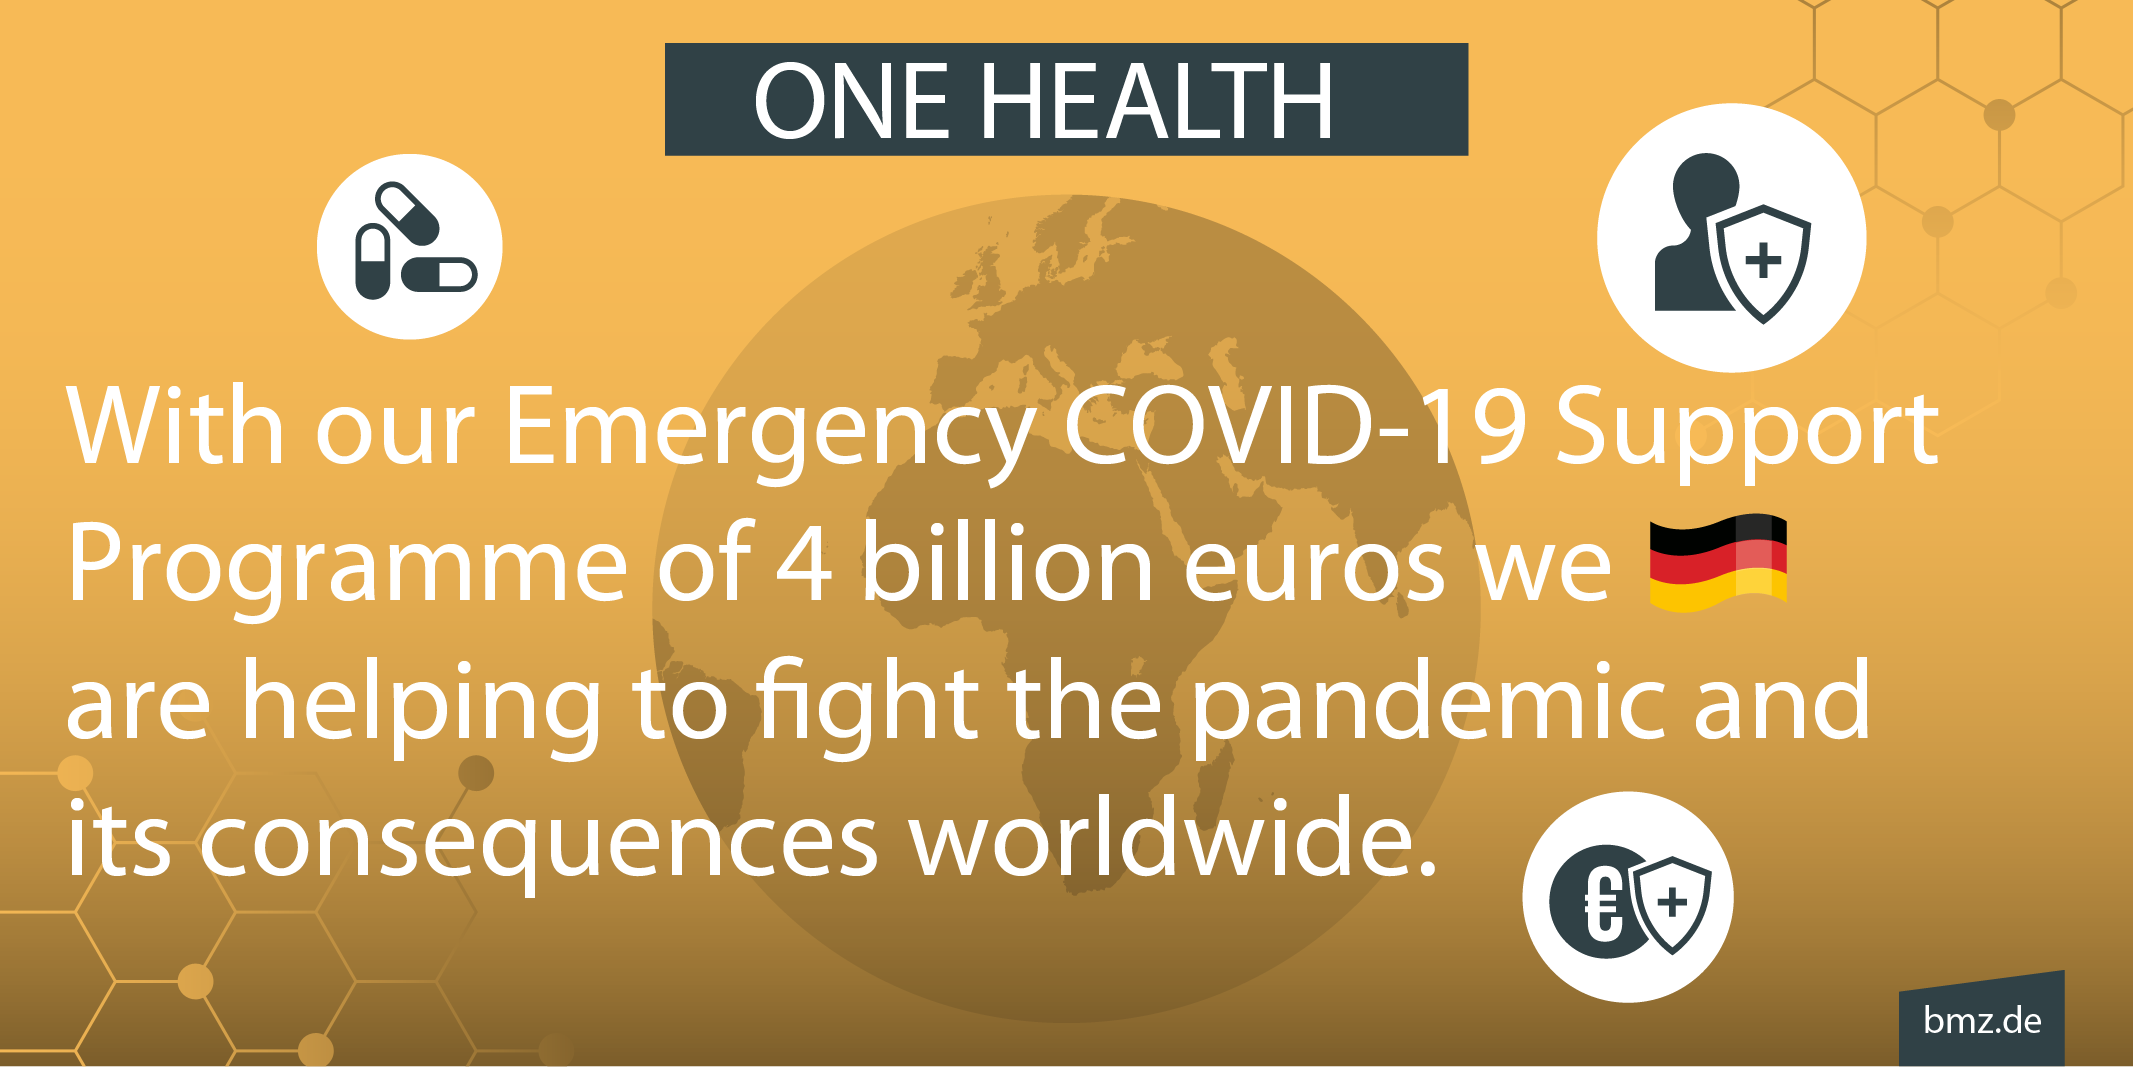 One Health: With our Emergency COVID-19 Support Programme endowed with four billion euros, we are helping to fight the pandemic and its consequences worldwide.